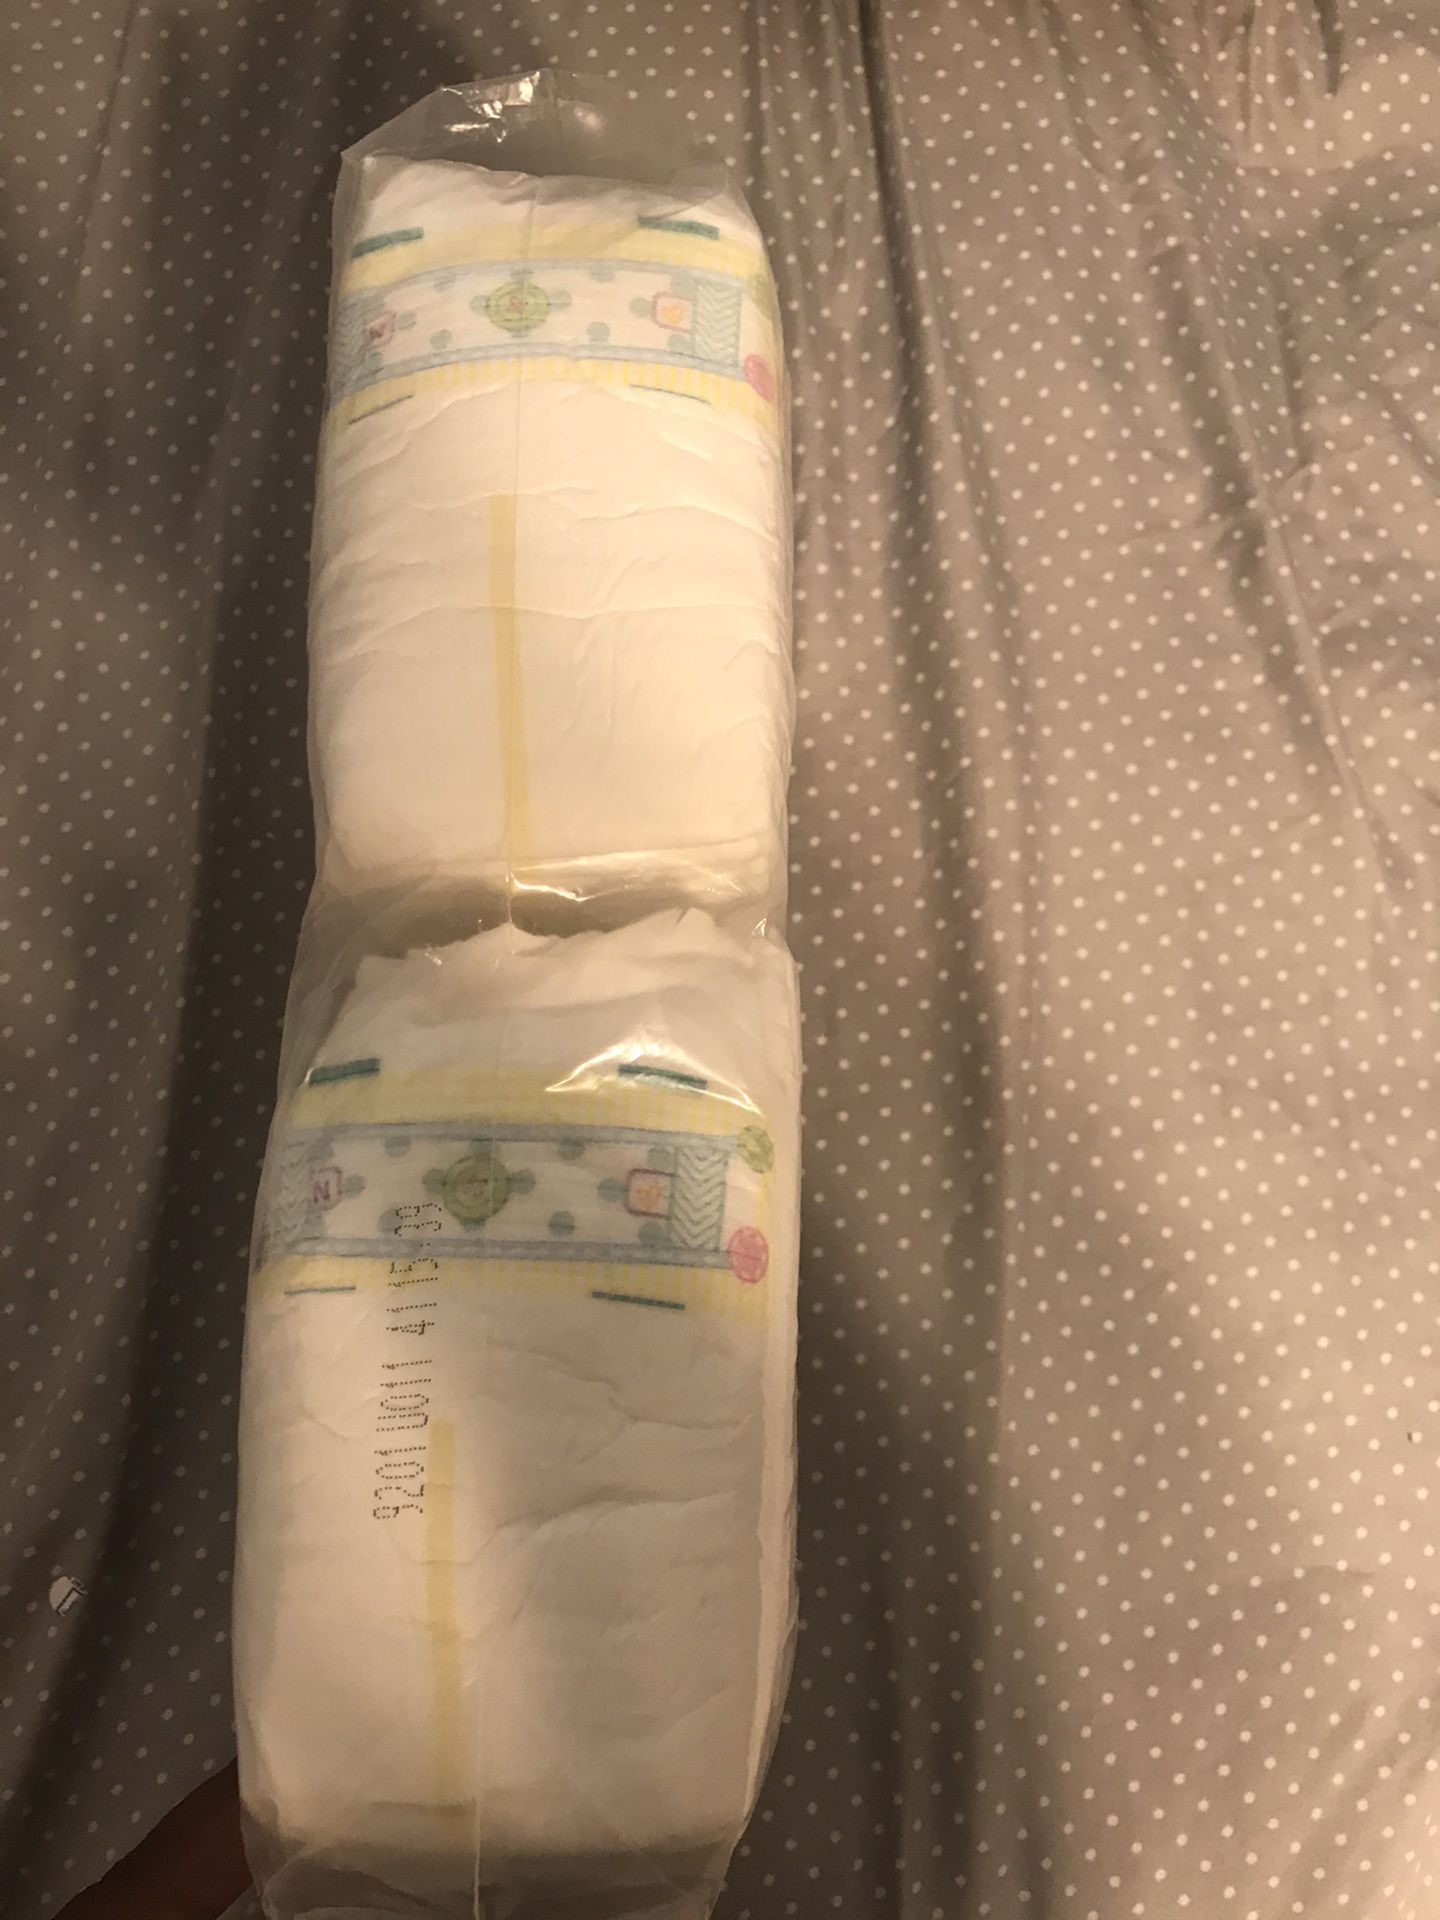 New born diapers ( pampers)